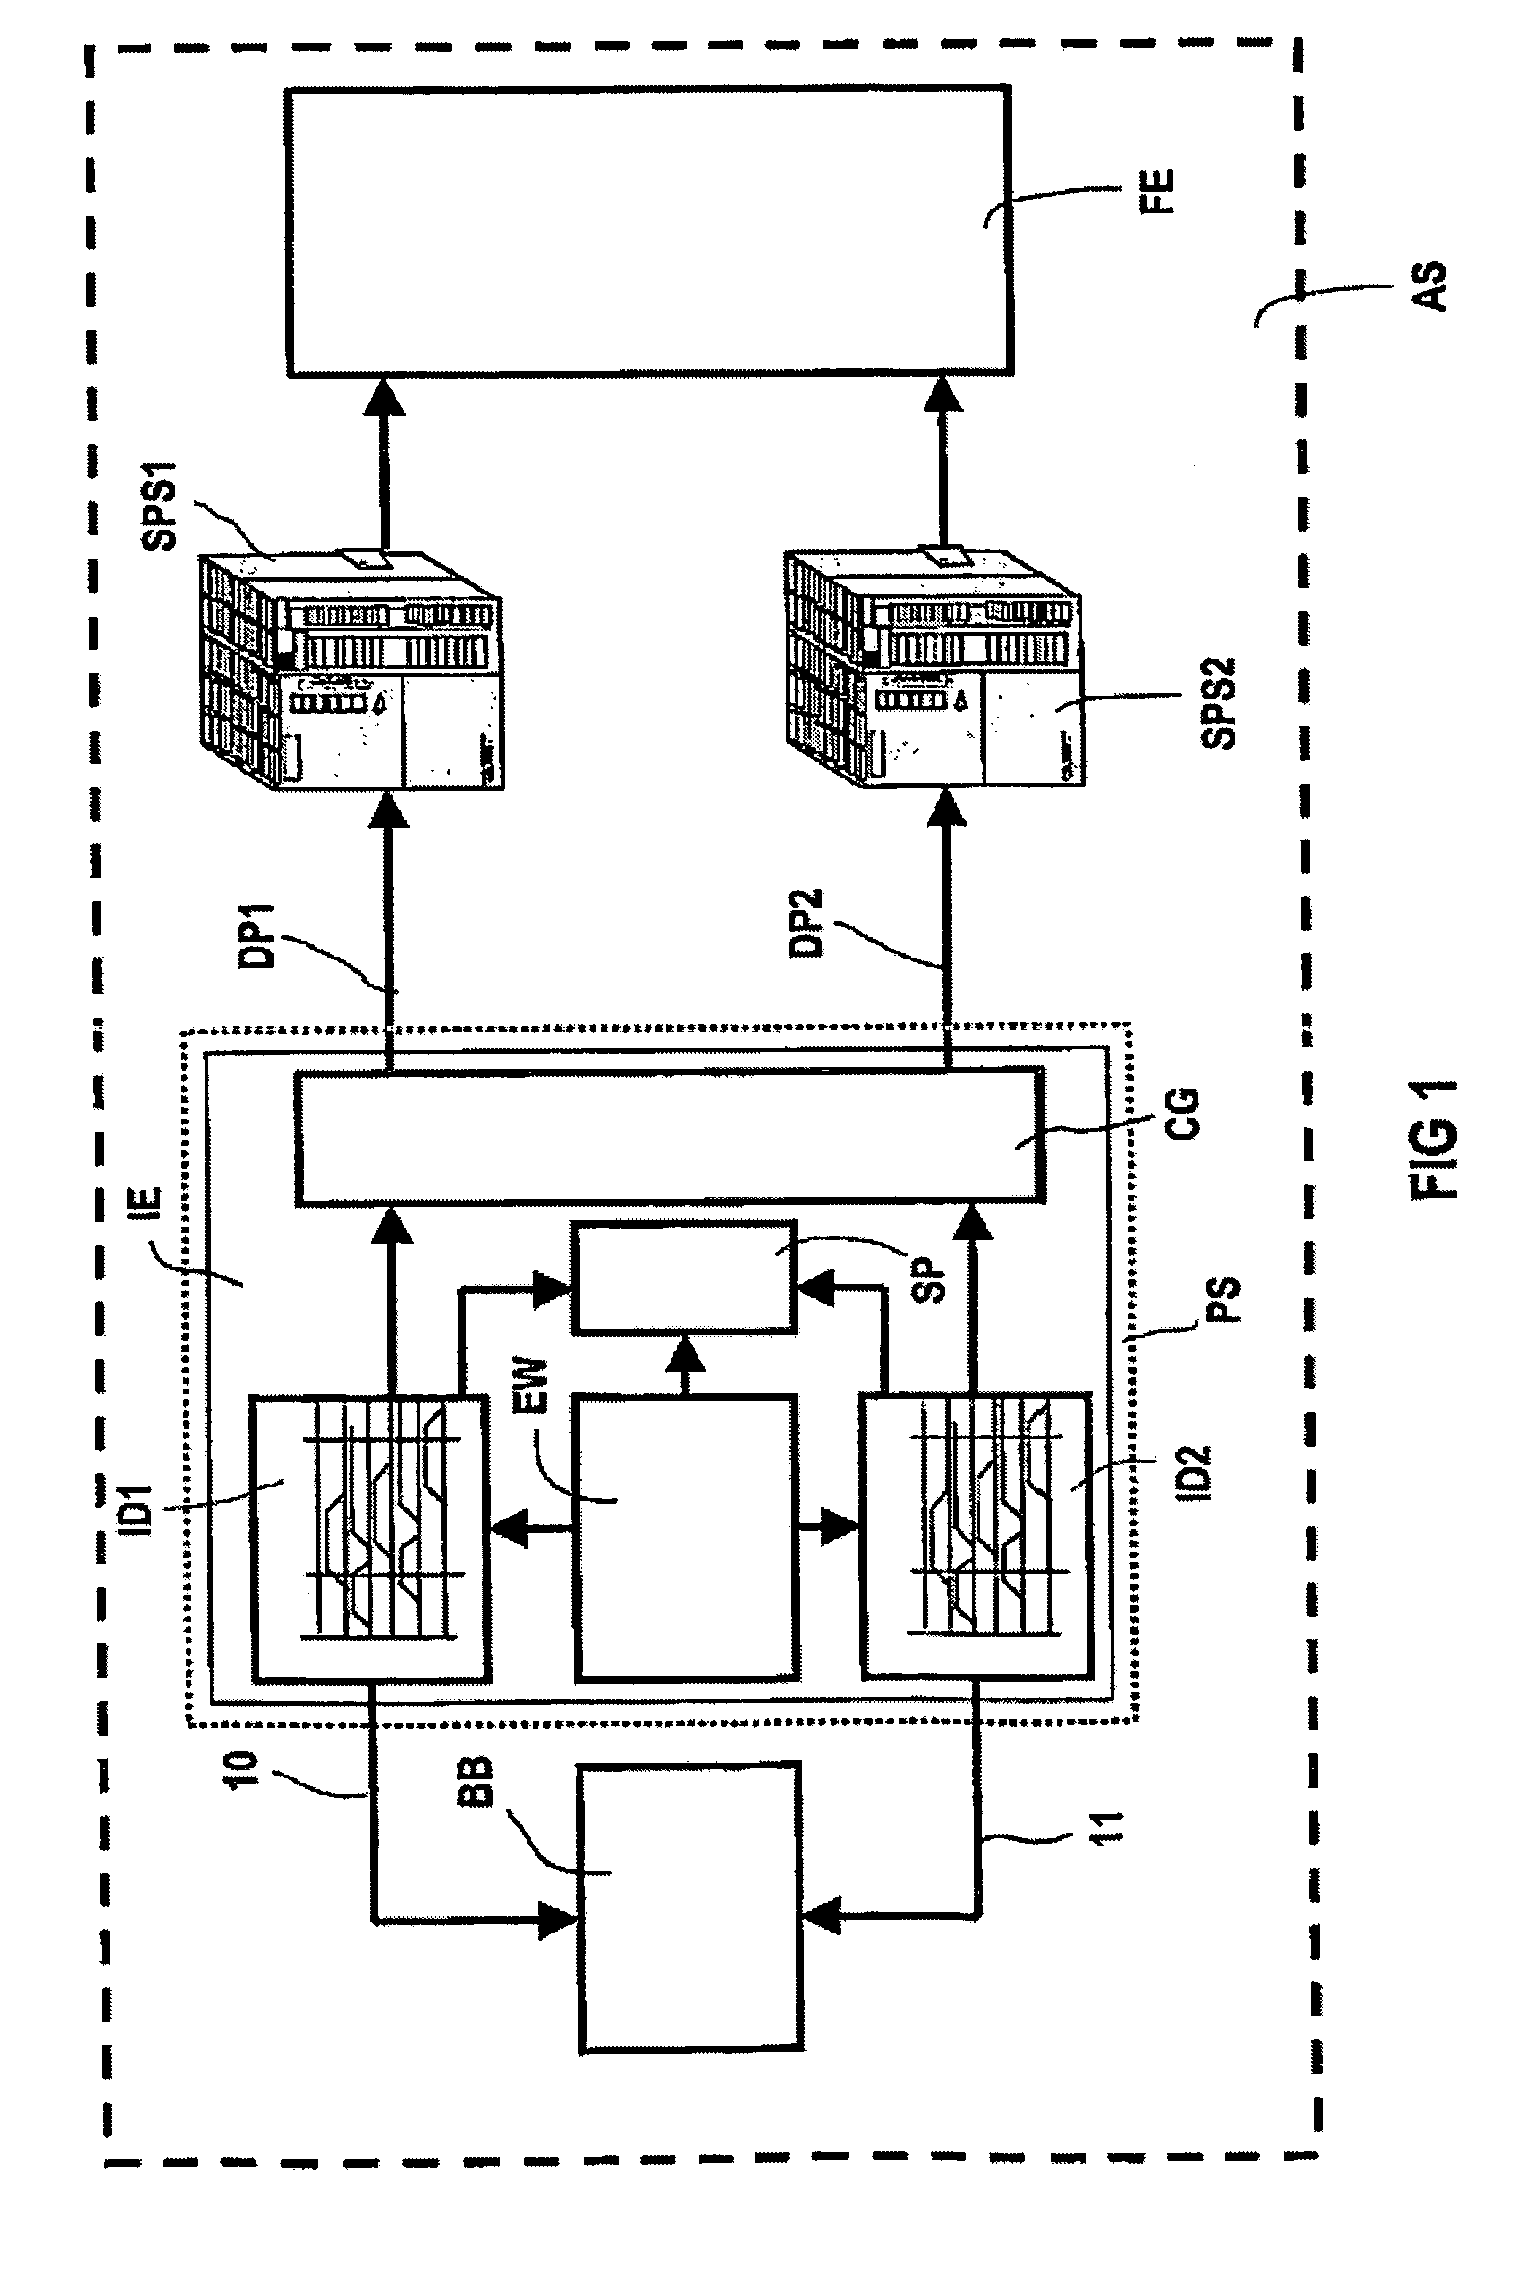 System and method for programming an automation system, based on pulse timing diagrams